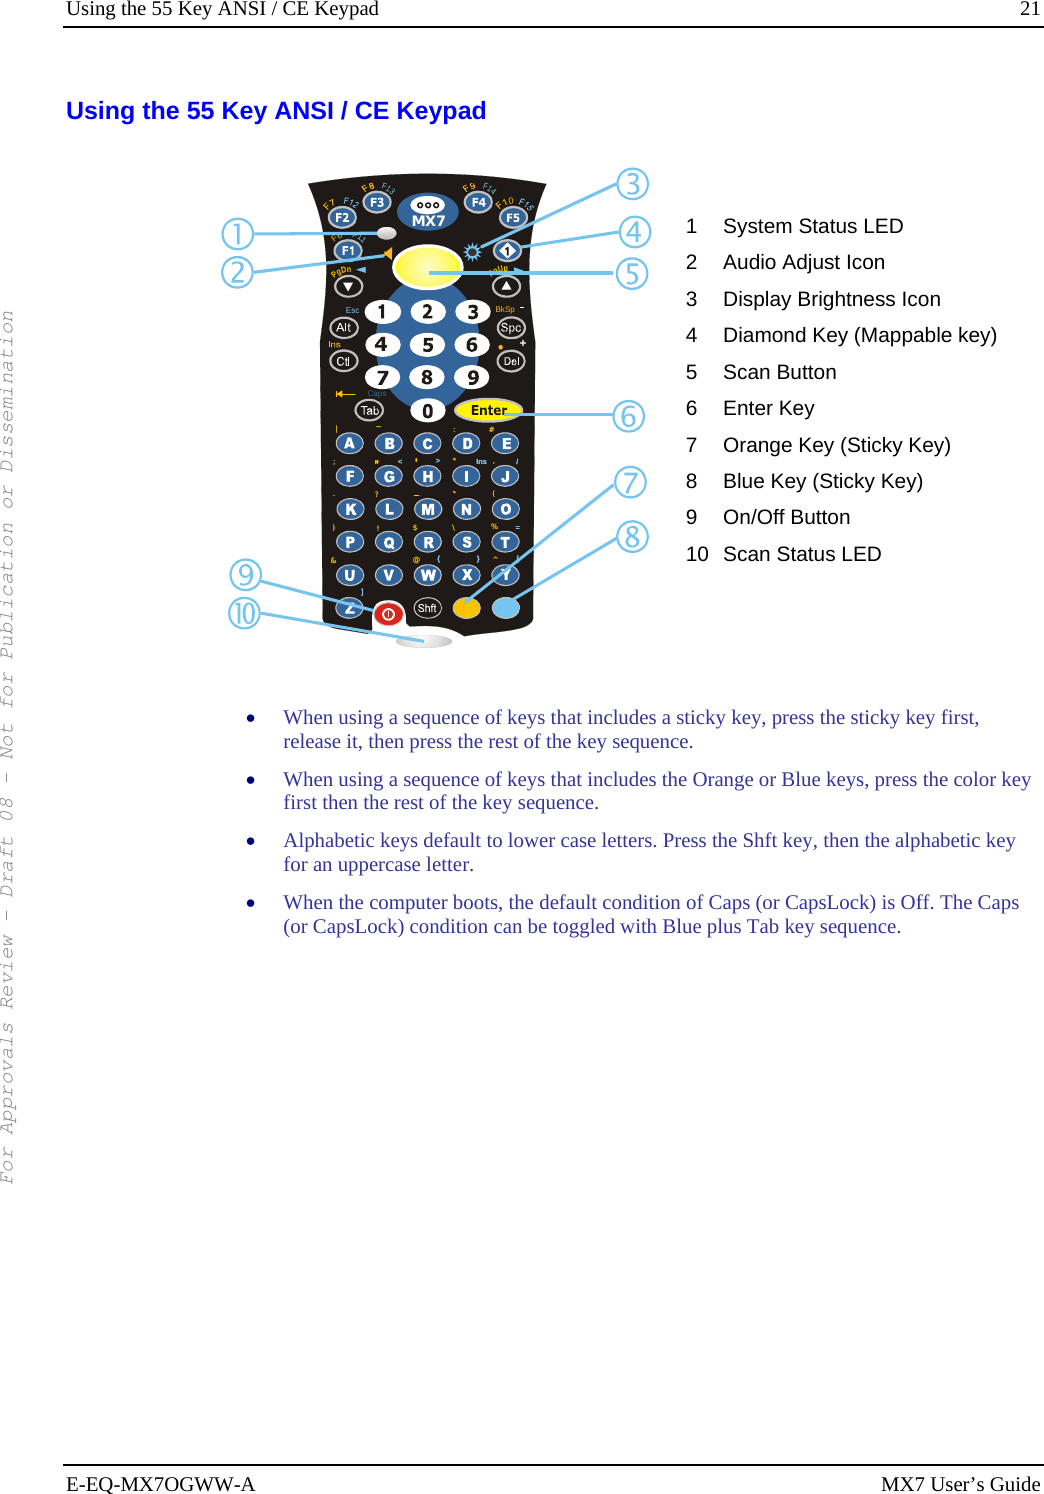 Using the 55 Key ANSI / CE Keypad  21 E-EQ-MX7OGWW-A MX7 User’s Guide Using the 55 Key ANSI / CE Keypad BkSp+F11MX7PgDnPgUpF6F13F14CapsEsc|~:#;*,&gt;/Ins&lt;.(?=)\!$%^&amp;@}{[]|~:#;*,&gt;/Ins&lt;.(?=)\!$%^&amp;@}{[] 1  System Status LED 2  Audio Adjust Icon 3  Display Brightness Icon 4  Diamond Key (Mappable key) 5 Scan Button 6 Enter Key 7  Orange Key (Sticky Key) 8  Blue Key (Sticky Key) 9 On/Off Button 10 Scan Status LED   • When using a sequence of keys that includes a sticky key, press the sticky key first, release it, then press the rest of the key sequence.  • When using a sequence of keys that includes the Orange or Blue keys, press the color key first then the rest of the key sequence.  • Alphabetic keys default to lower case letters. Press the Shft key, then the alphabetic key for an uppercase letter. • When the computer boots, the default condition of Caps (or CapsLock) is Off. The Caps (or CapsLock) condition can be toggled with Blue plus Tab key sequence.    For Approvals Review - Draft 08 - Not for Publication or Dissemination